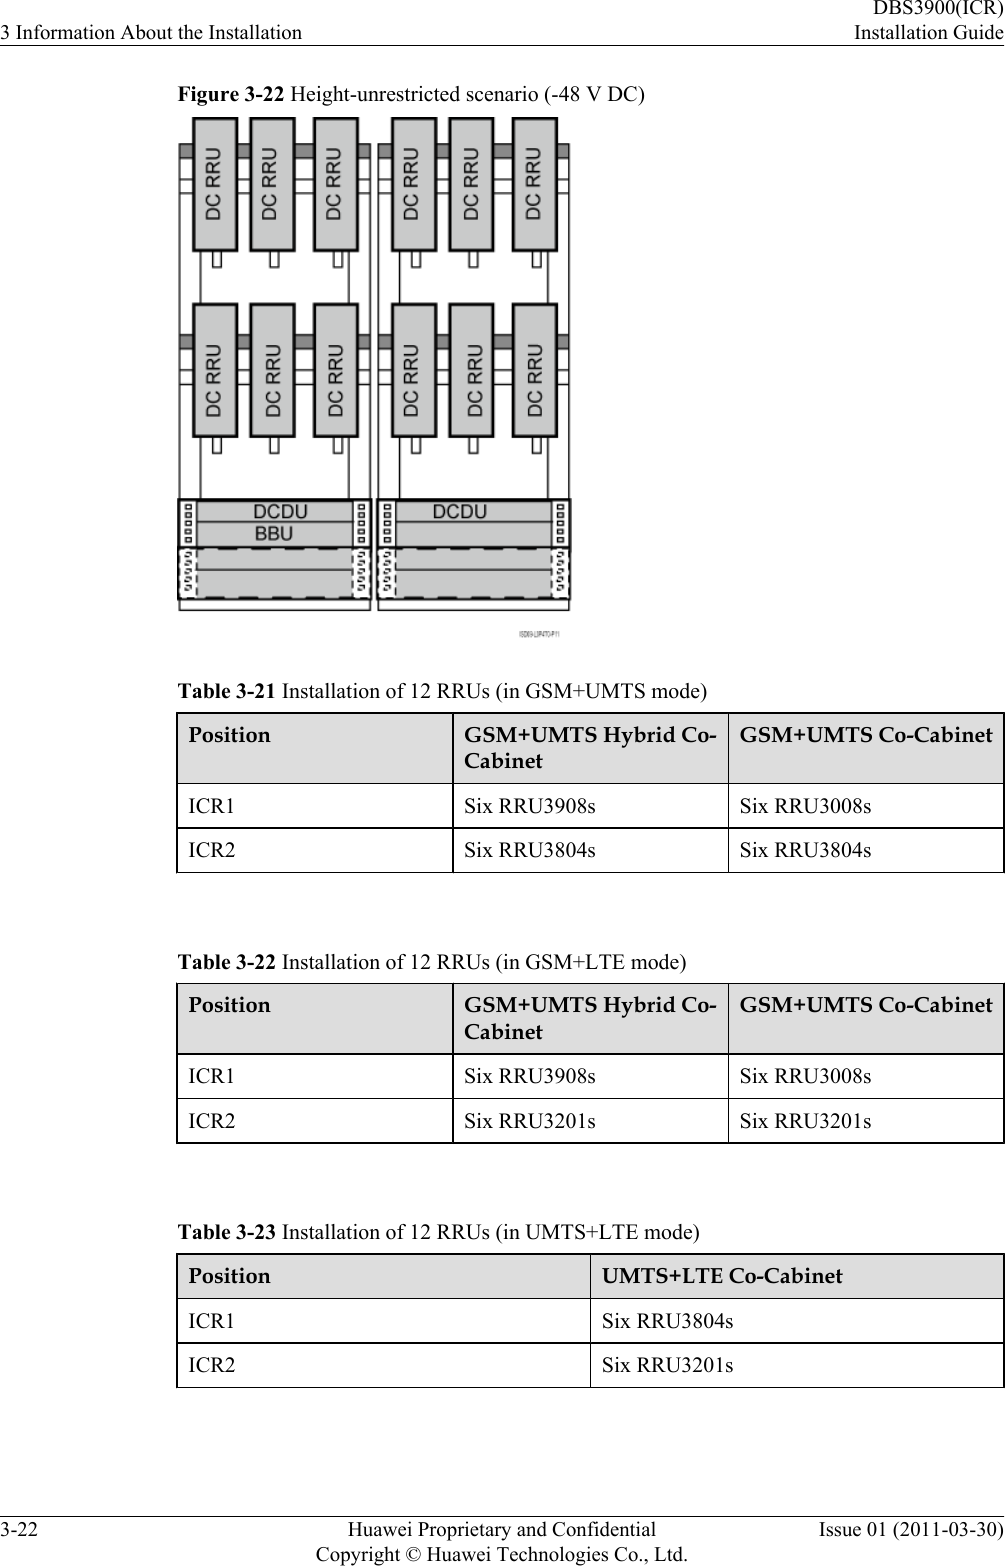 Figure 3-22 Height-unrestricted scenario (-48 V DC)Table 3-21 Installation of 12 RRUs (in GSM+UMTS mode)Position GSM+UMTS Hybrid Co-CabinetGSM+UMTS Co-CabinetICR1 Six RRU3908s Six RRU3008sICR2 Six RRU3804s Six RRU3804s Table 3-22 Installation of 12 RRUs (in GSM+LTE mode)Position GSM+UMTS Hybrid Co-CabinetGSM+UMTS Co-CabinetICR1 Six RRU3908s Six RRU3008sICR2 Six RRU3201s Six RRU3201s Table 3-23 Installation of 12 RRUs (in UMTS+LTE mode)Position UMTS+LTE Co-CabinetICR1 Six RRU3804sICR2 Six RRU3201s 3 Information About the InstallationDBS3900(ICR)Installation Guide3-22 Huawei Proprietary and ConfidentialCopyright © Huawei Technologies Co., Ltd.Issue 01 (2011-03-30)